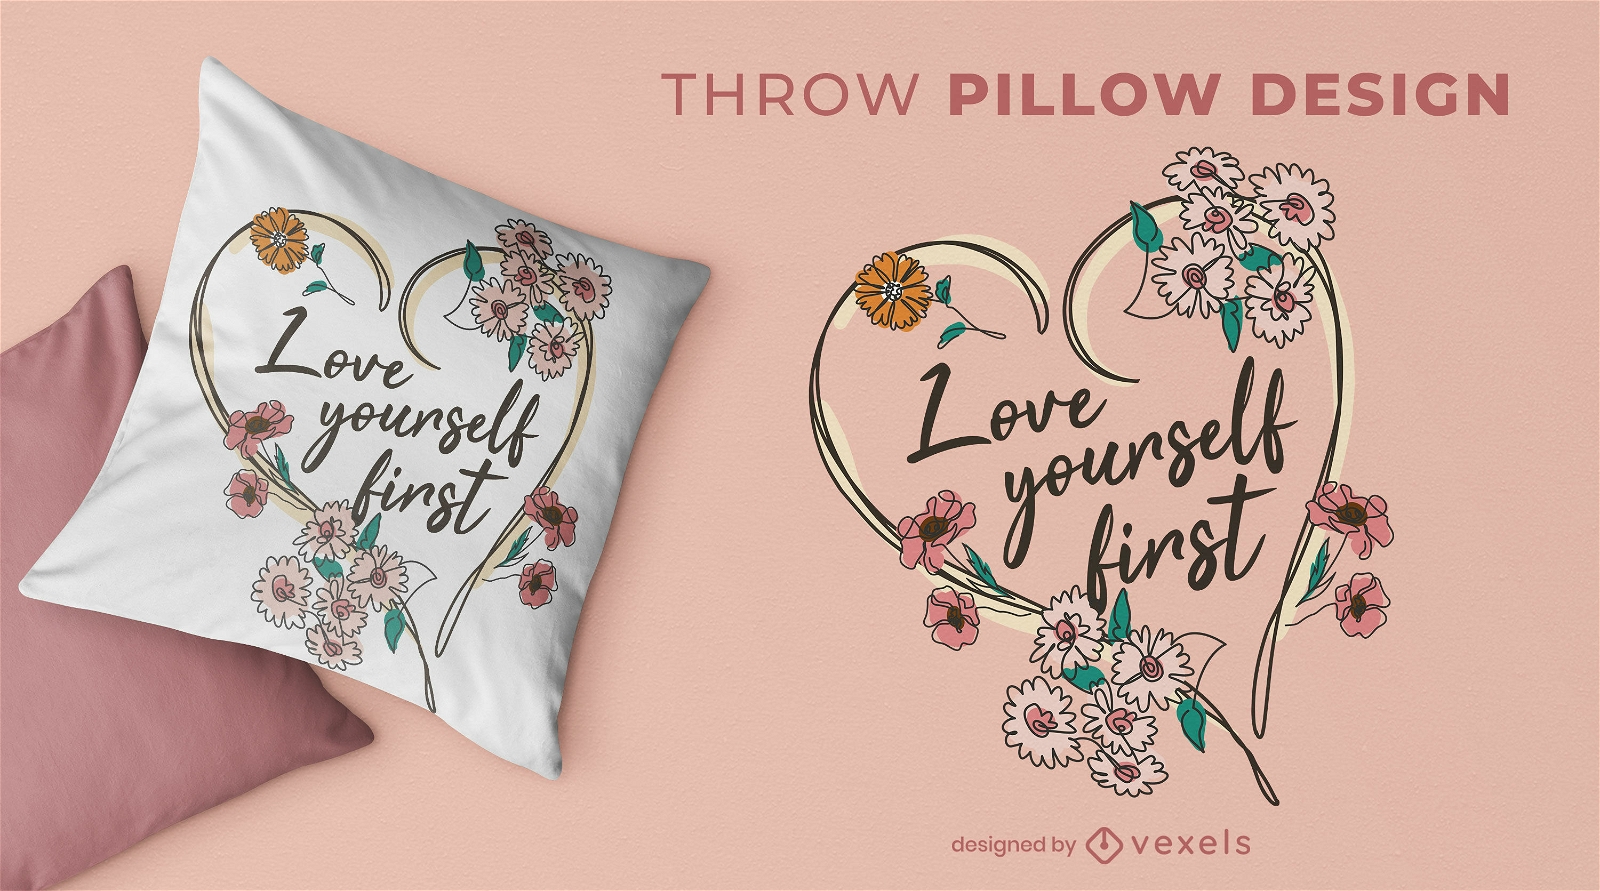 Love yourself lettering throw pillow design